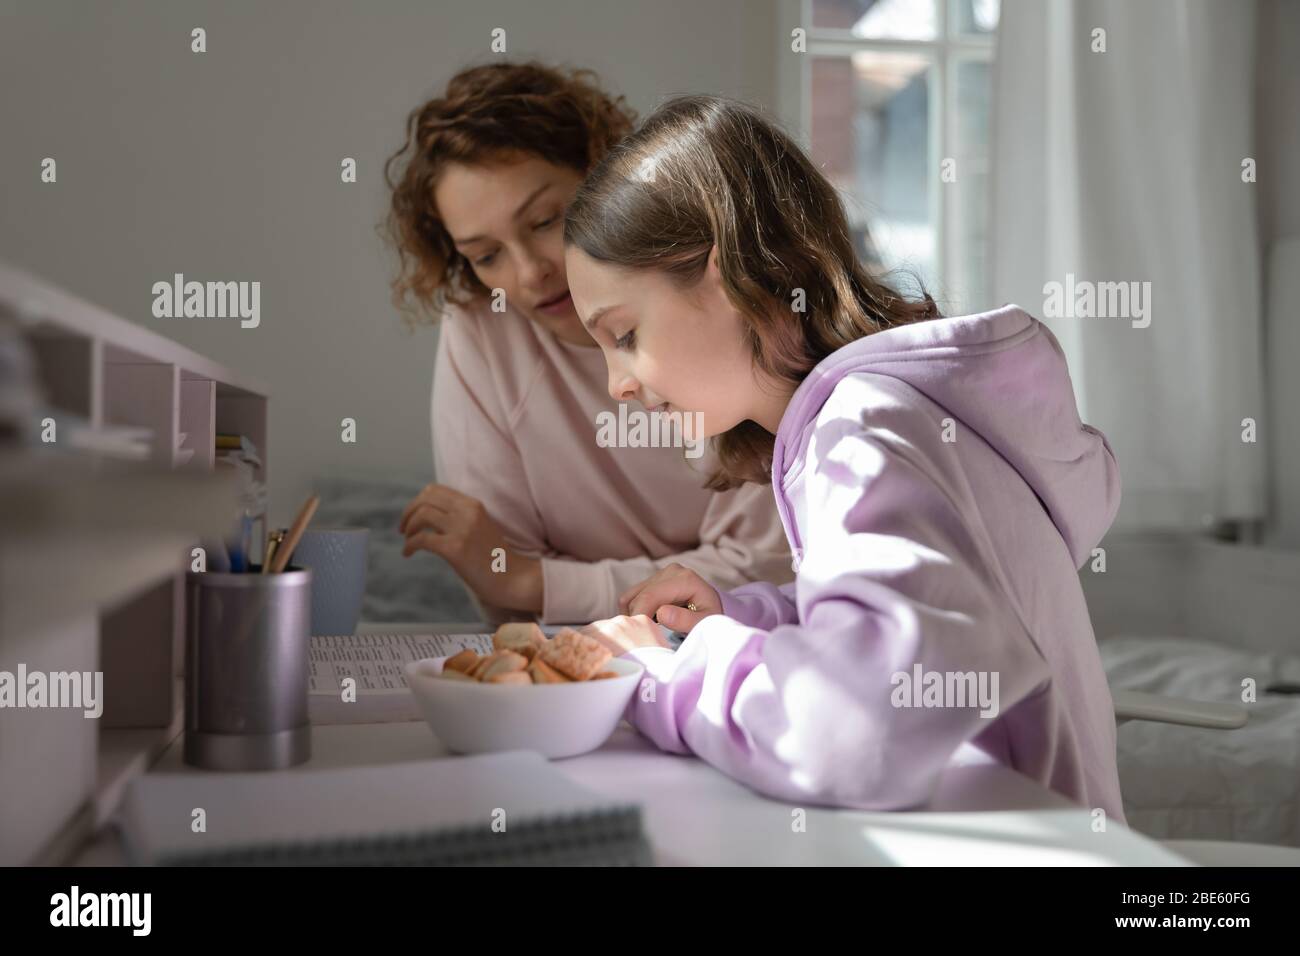 Focused mom helping teenage daughter doing homework studying from home Stock Photo